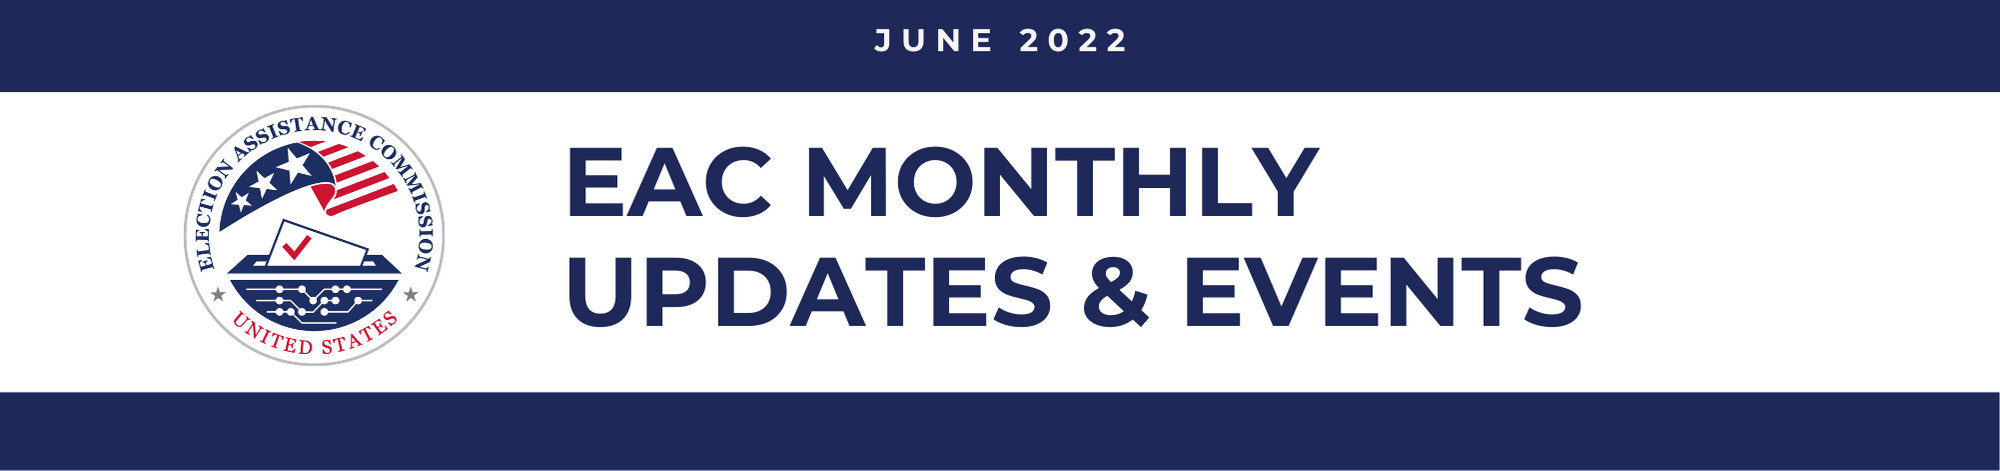 June 2022 EAC Monthly Updates & Events